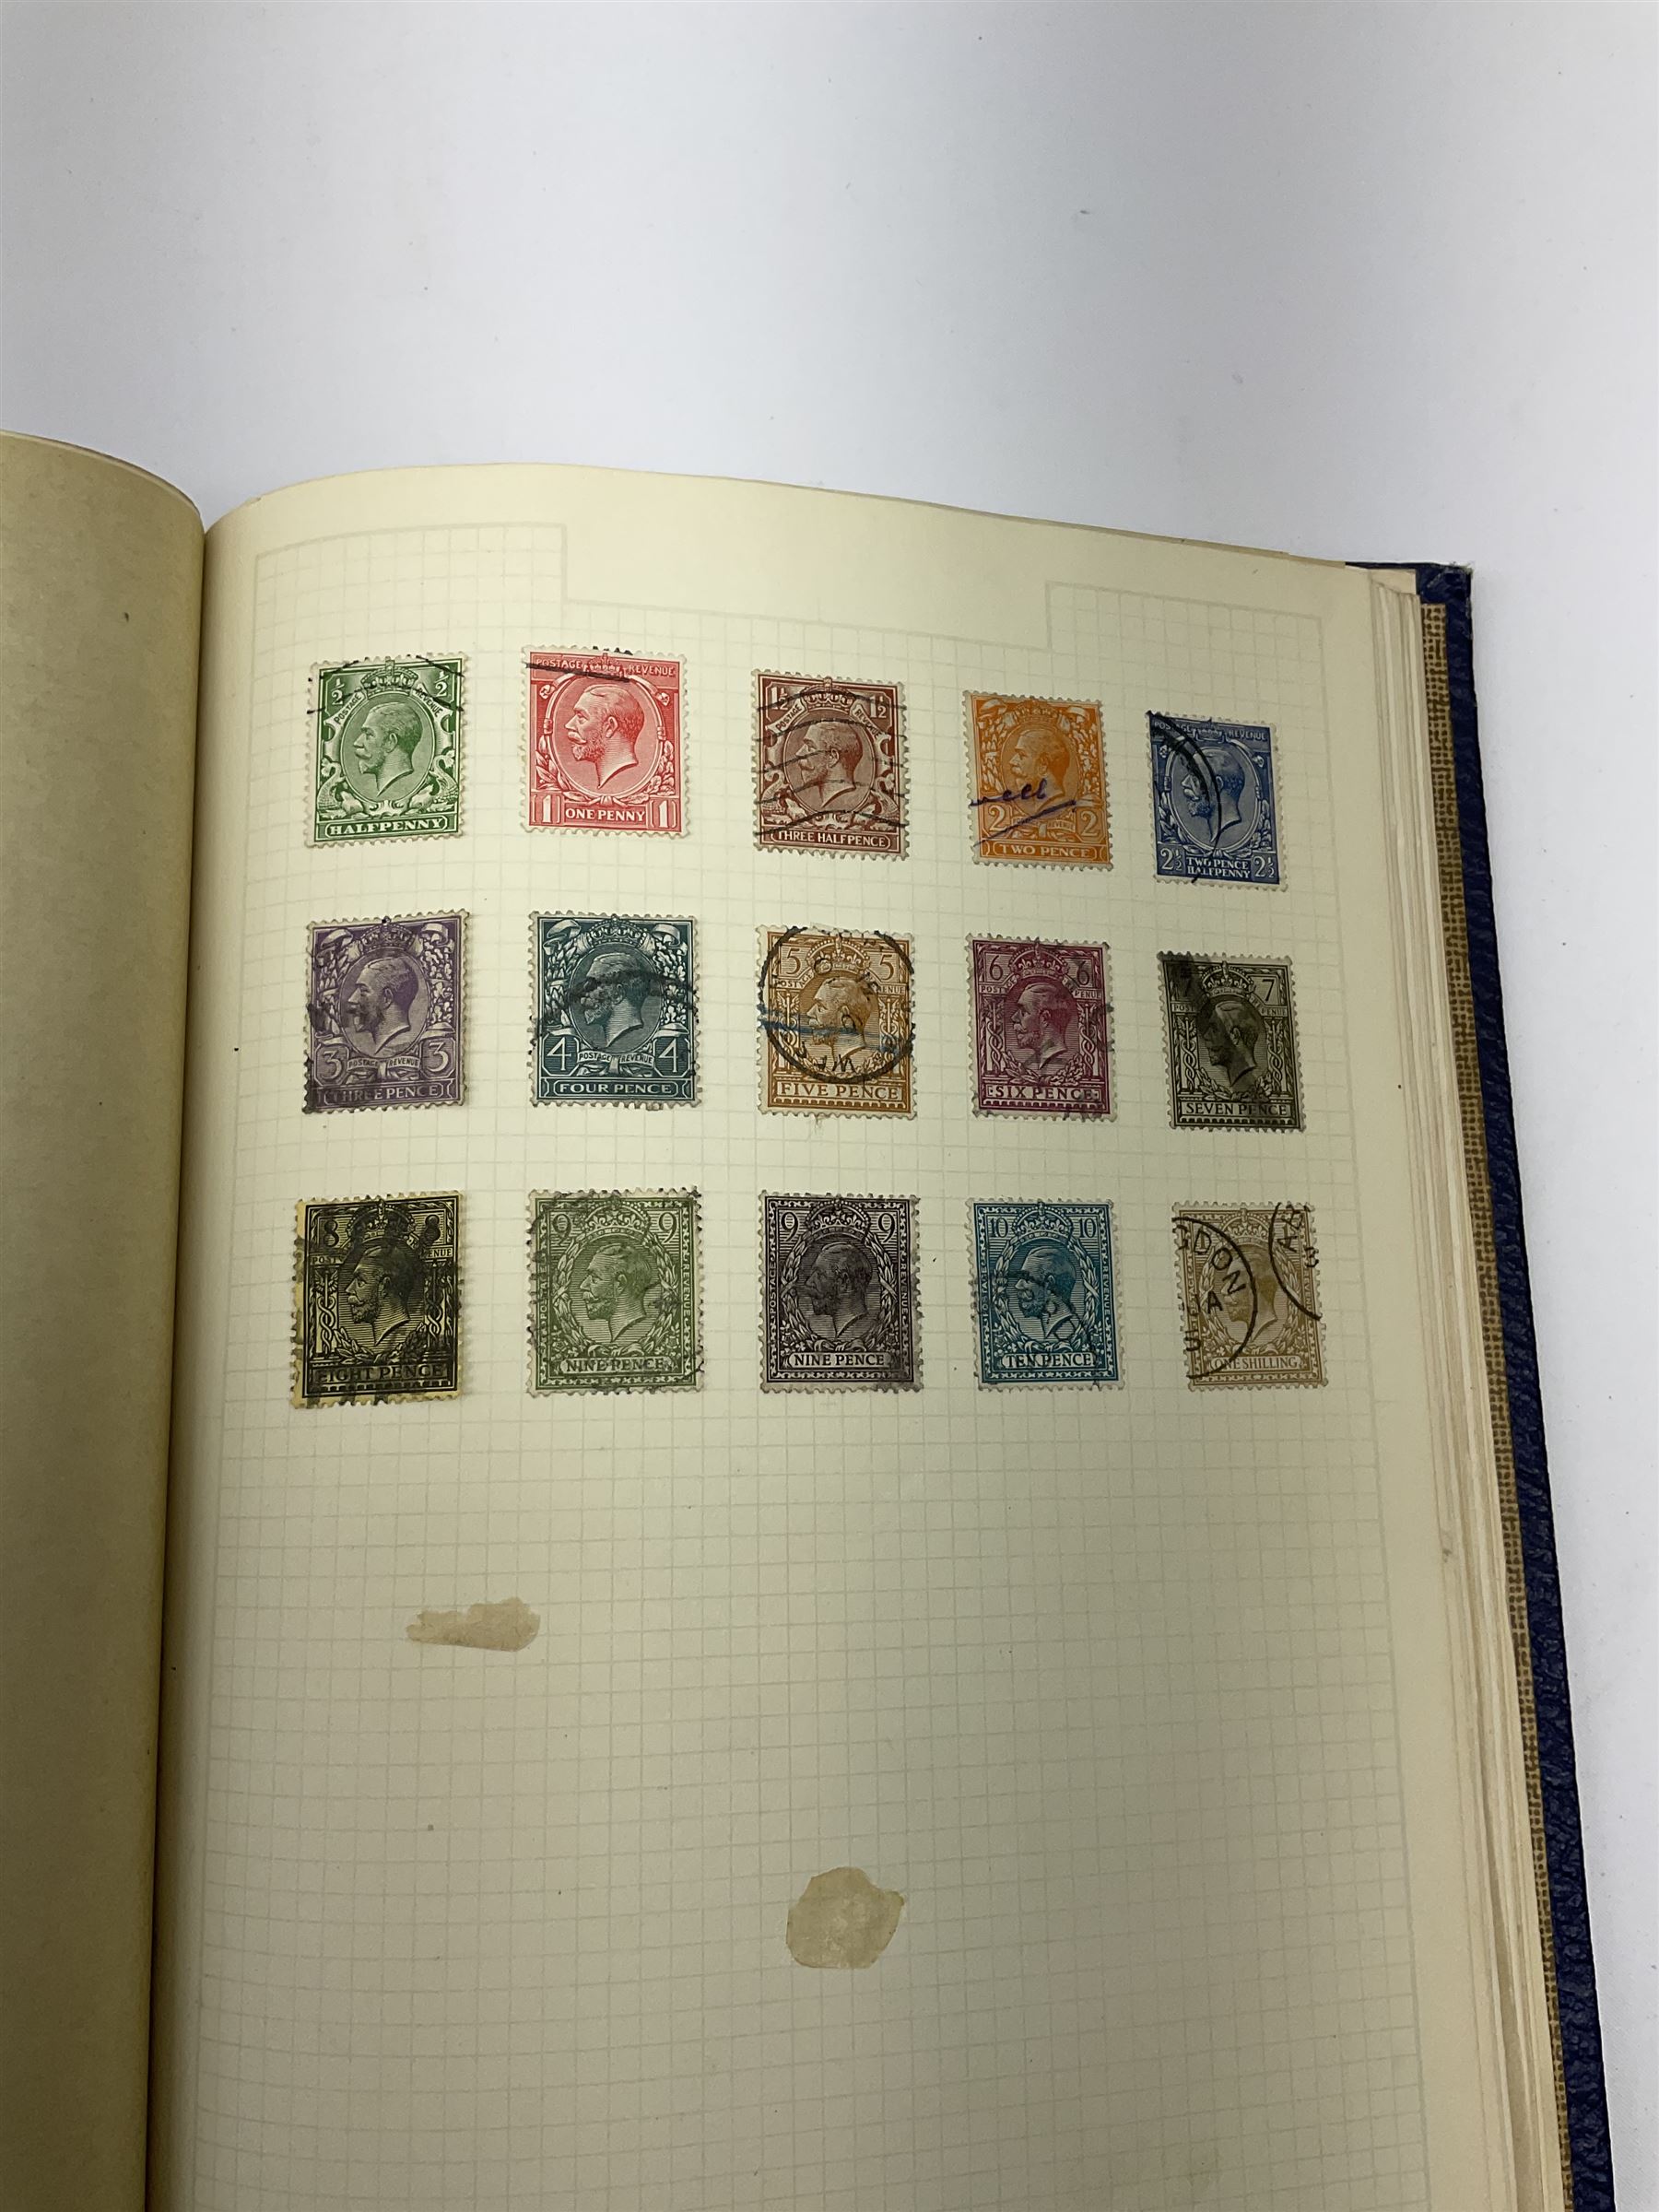 Great British Queen Victoria and later stamps including imperf penny reds with a few MX cancel examp - Image 9 of 9